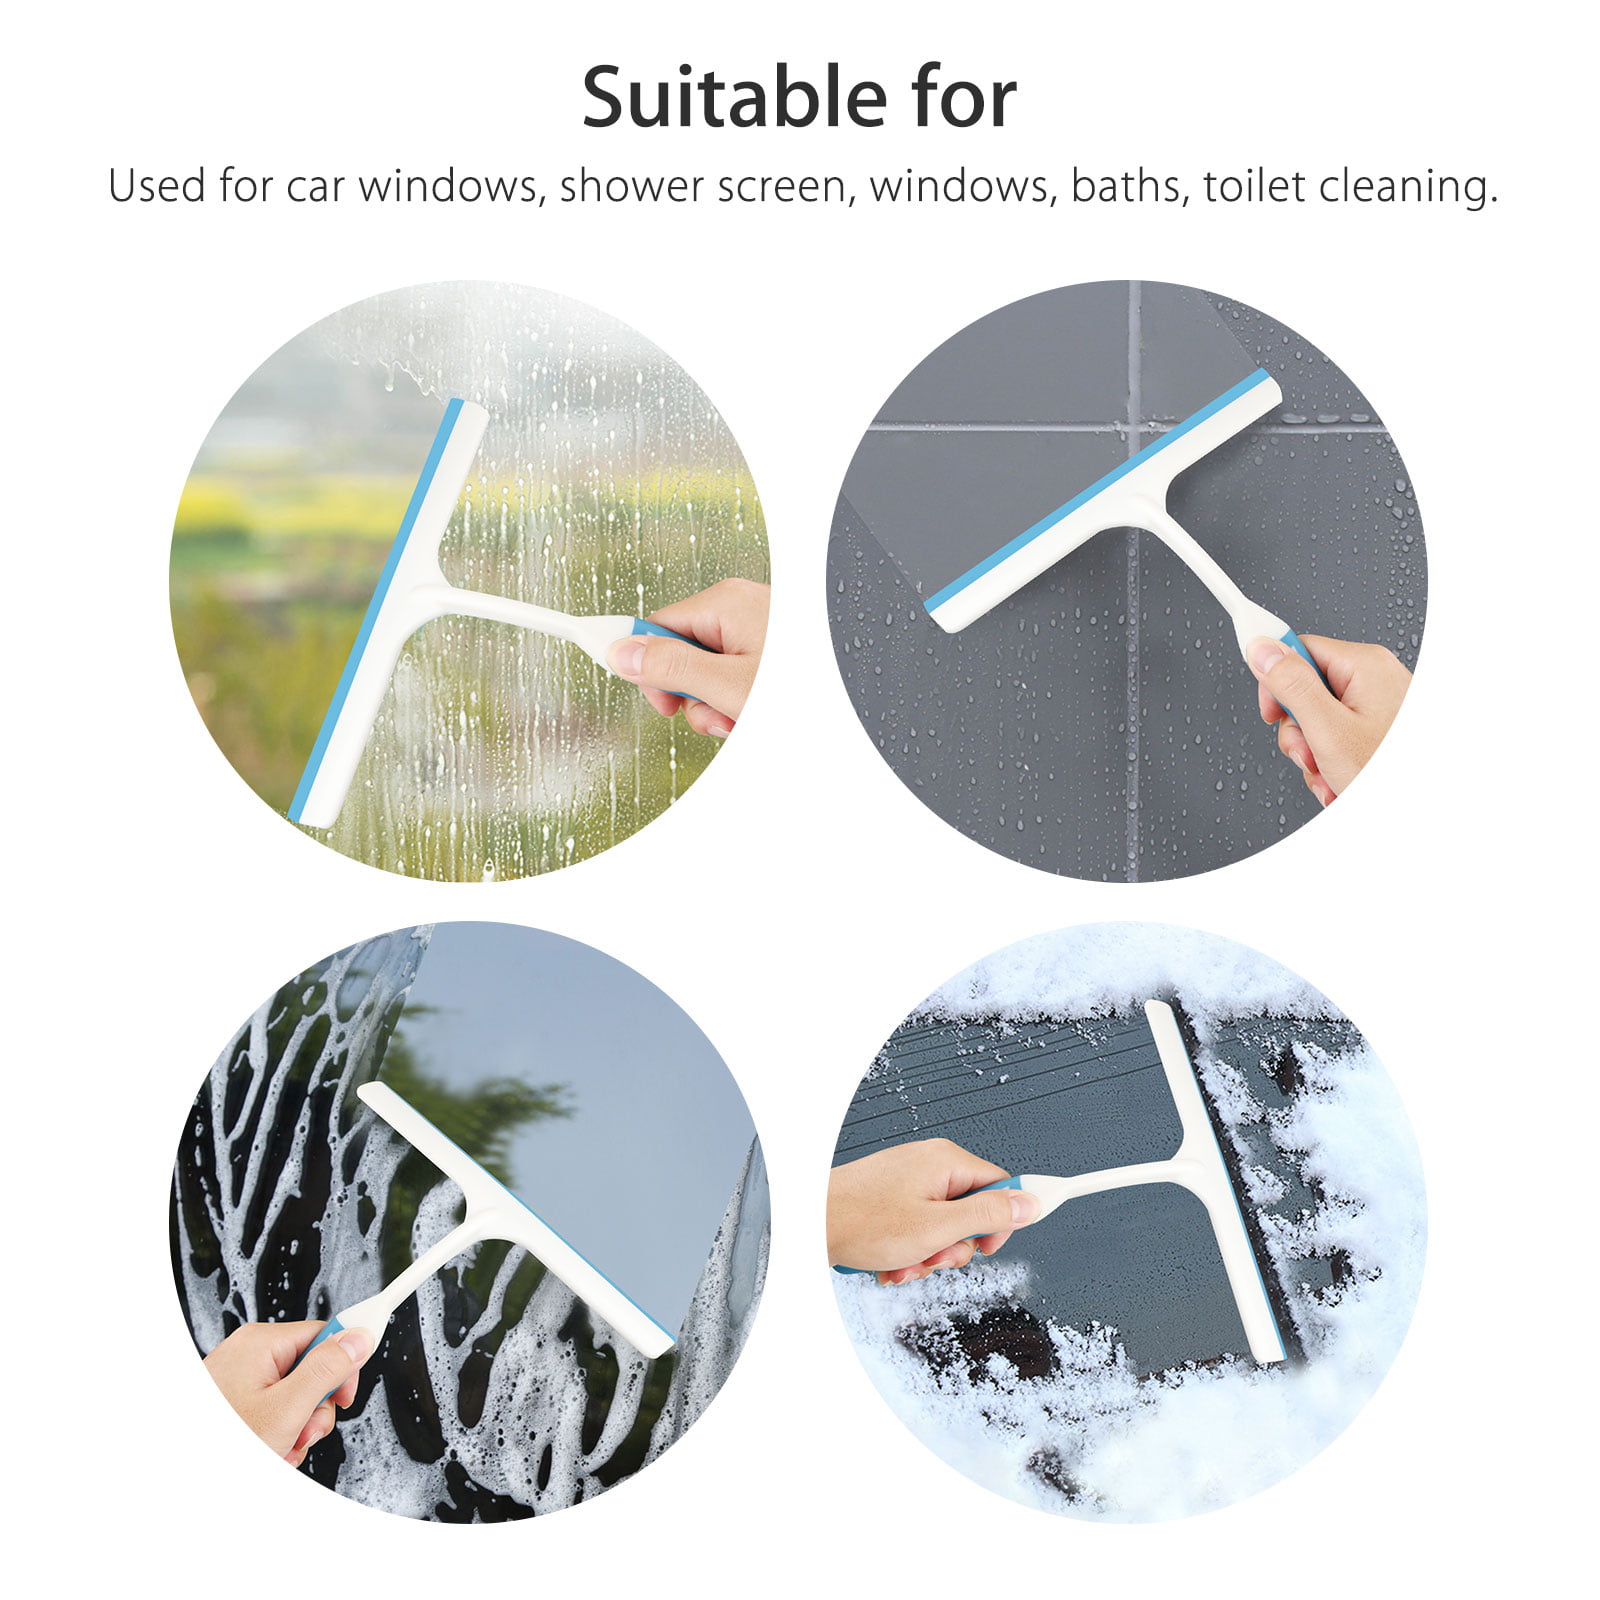 Glass Door 9-Inch All-Purpose Silicone Window Squeegee Wiper Without Streaking for Windows Cleaning KinSeng Shower Squeegee with Hook Bathroom Wall Black Mirrors Tiles and Windshield 